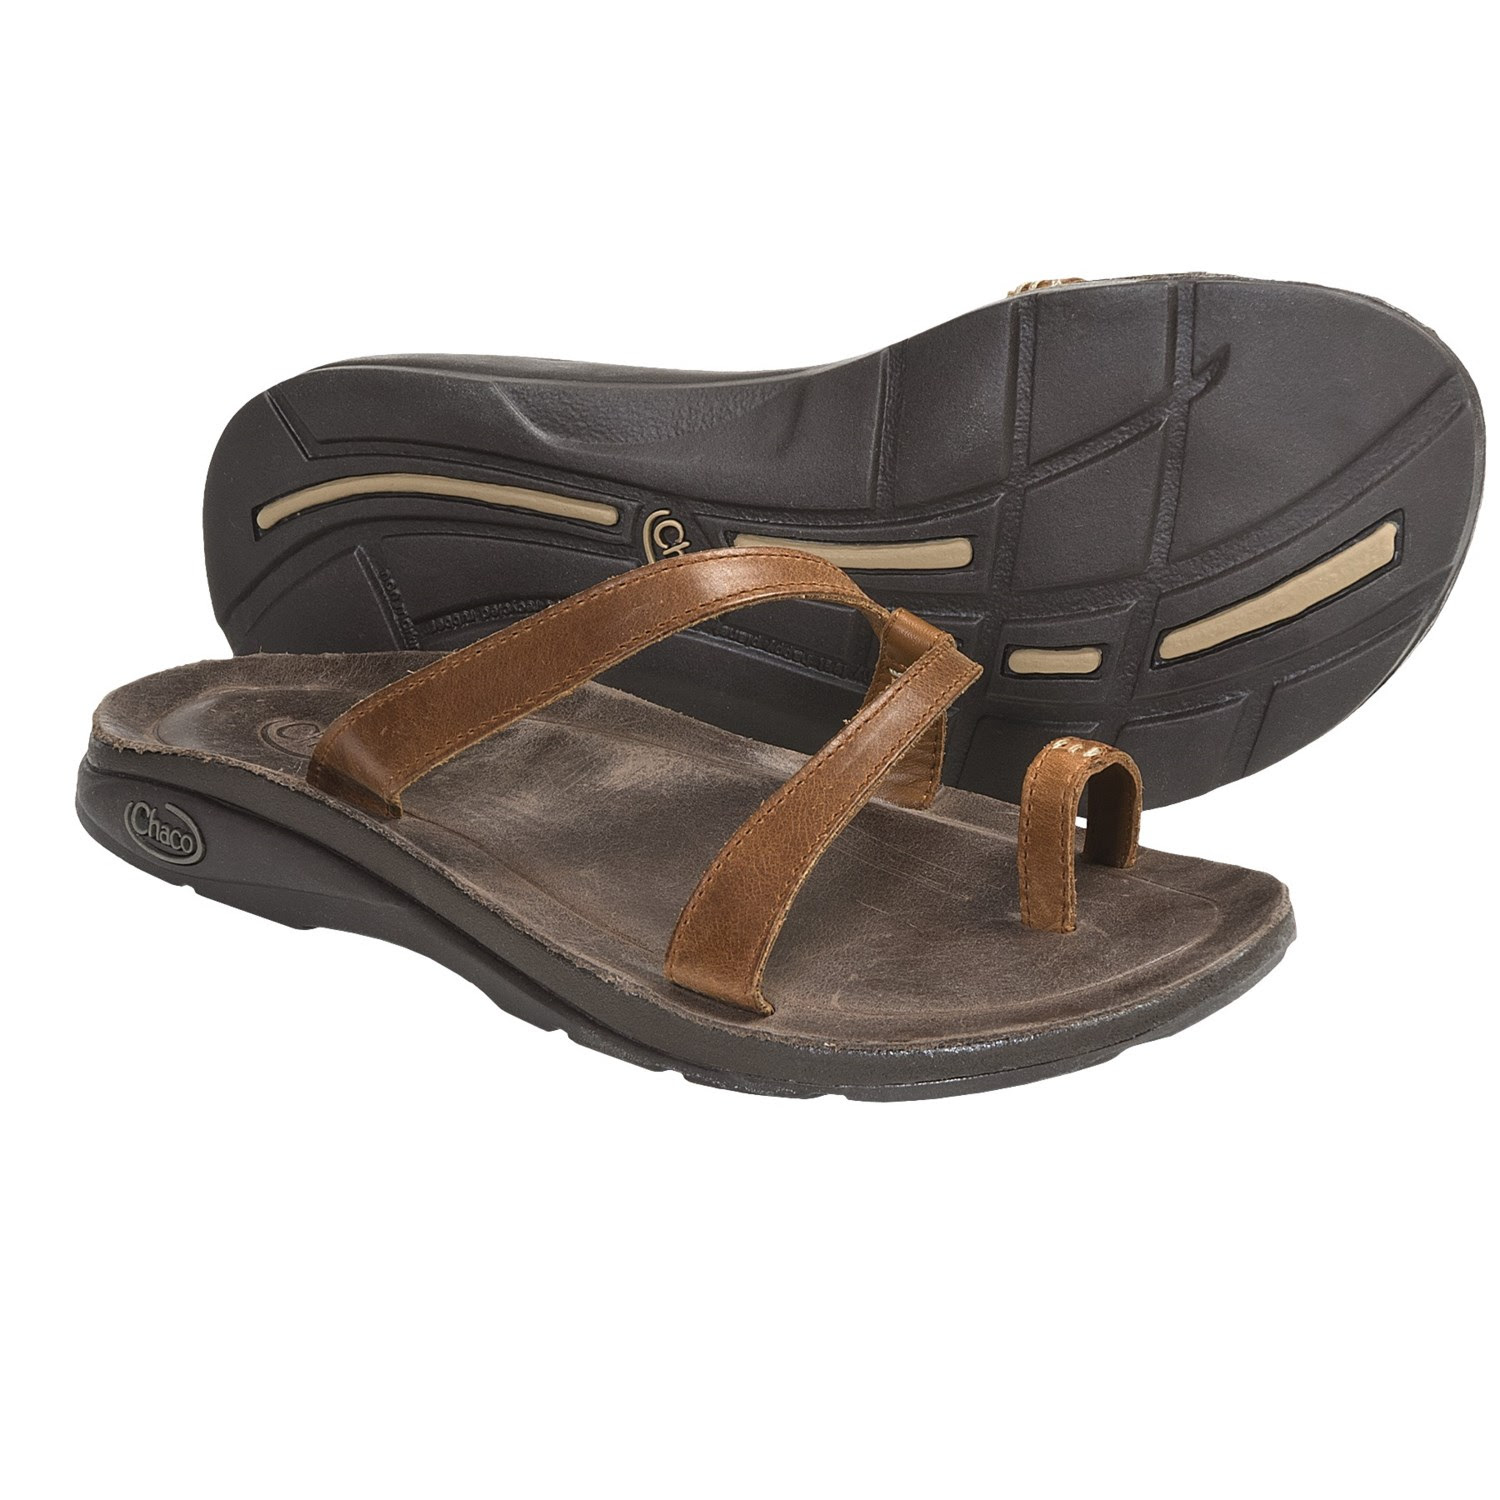 Chaco Indigen Sandals Leather For Women ~ Outdoor Sandals